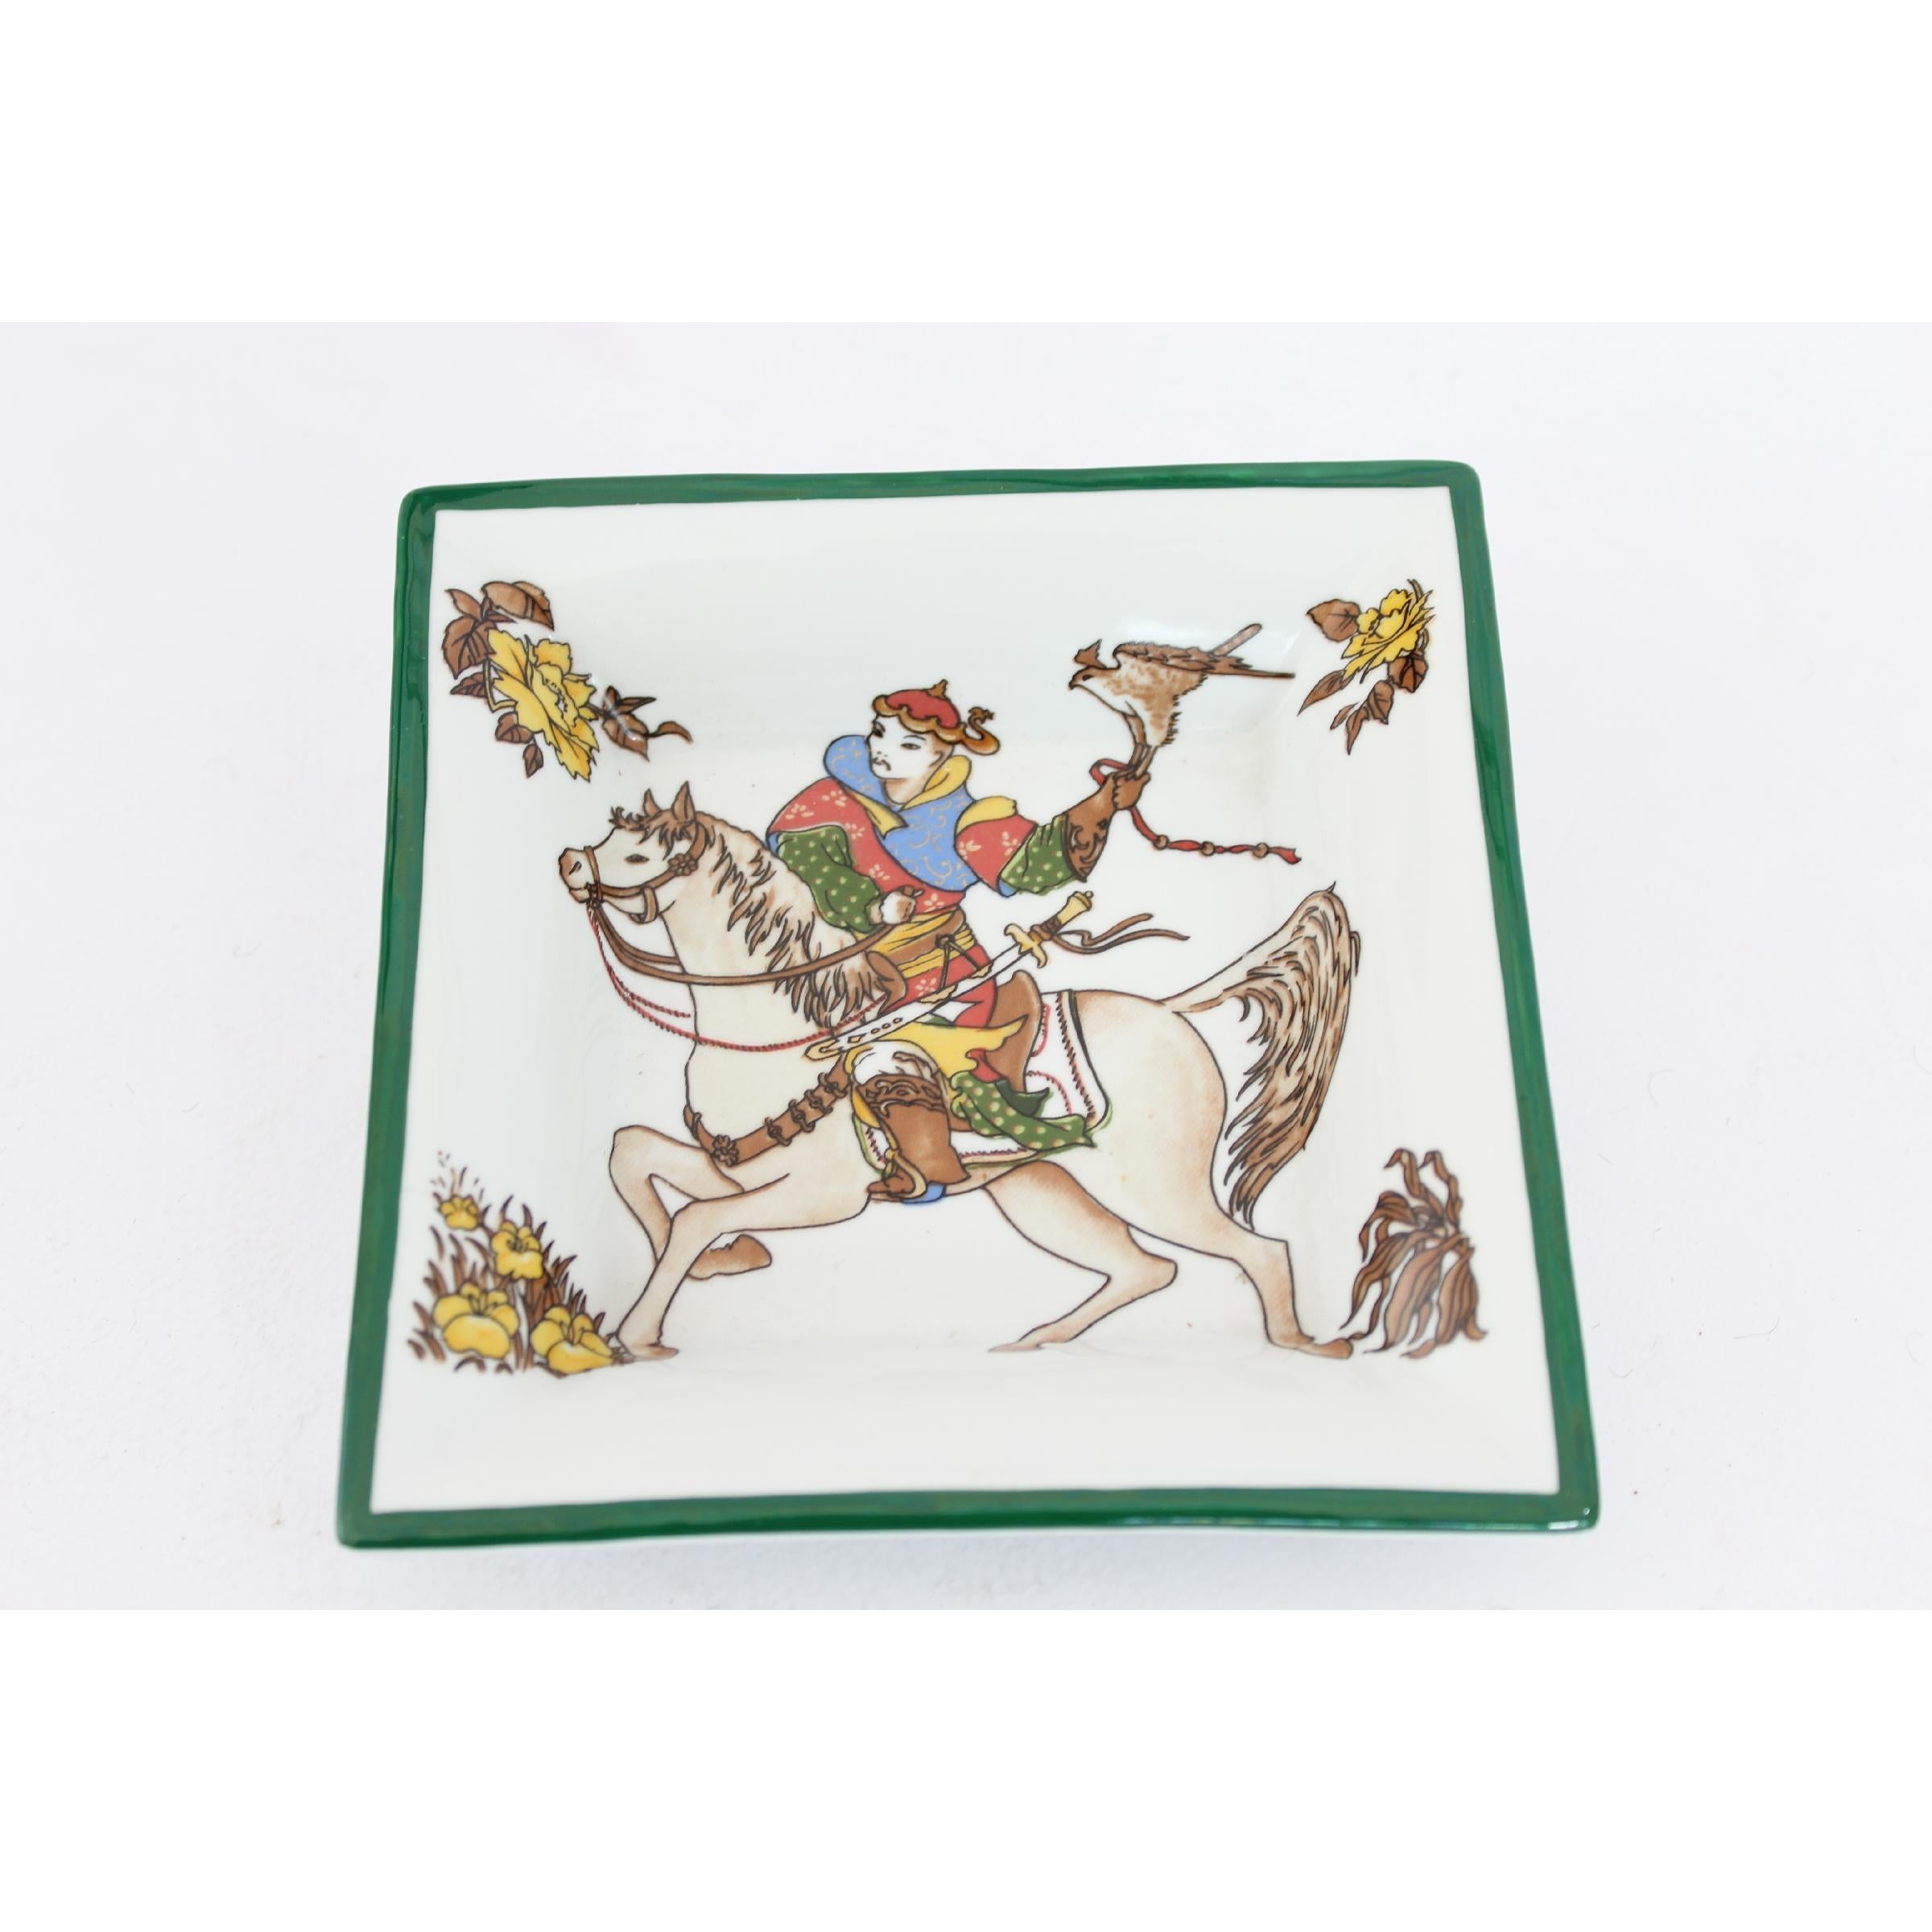 Salvatore Ferragamo vintage ashtray, white color with green border, made in porcelain. Depicted a person on horseback. Felt on the back.
Made in Italy. Excellent vintage conditions.

Measures: 13 x 13 cm